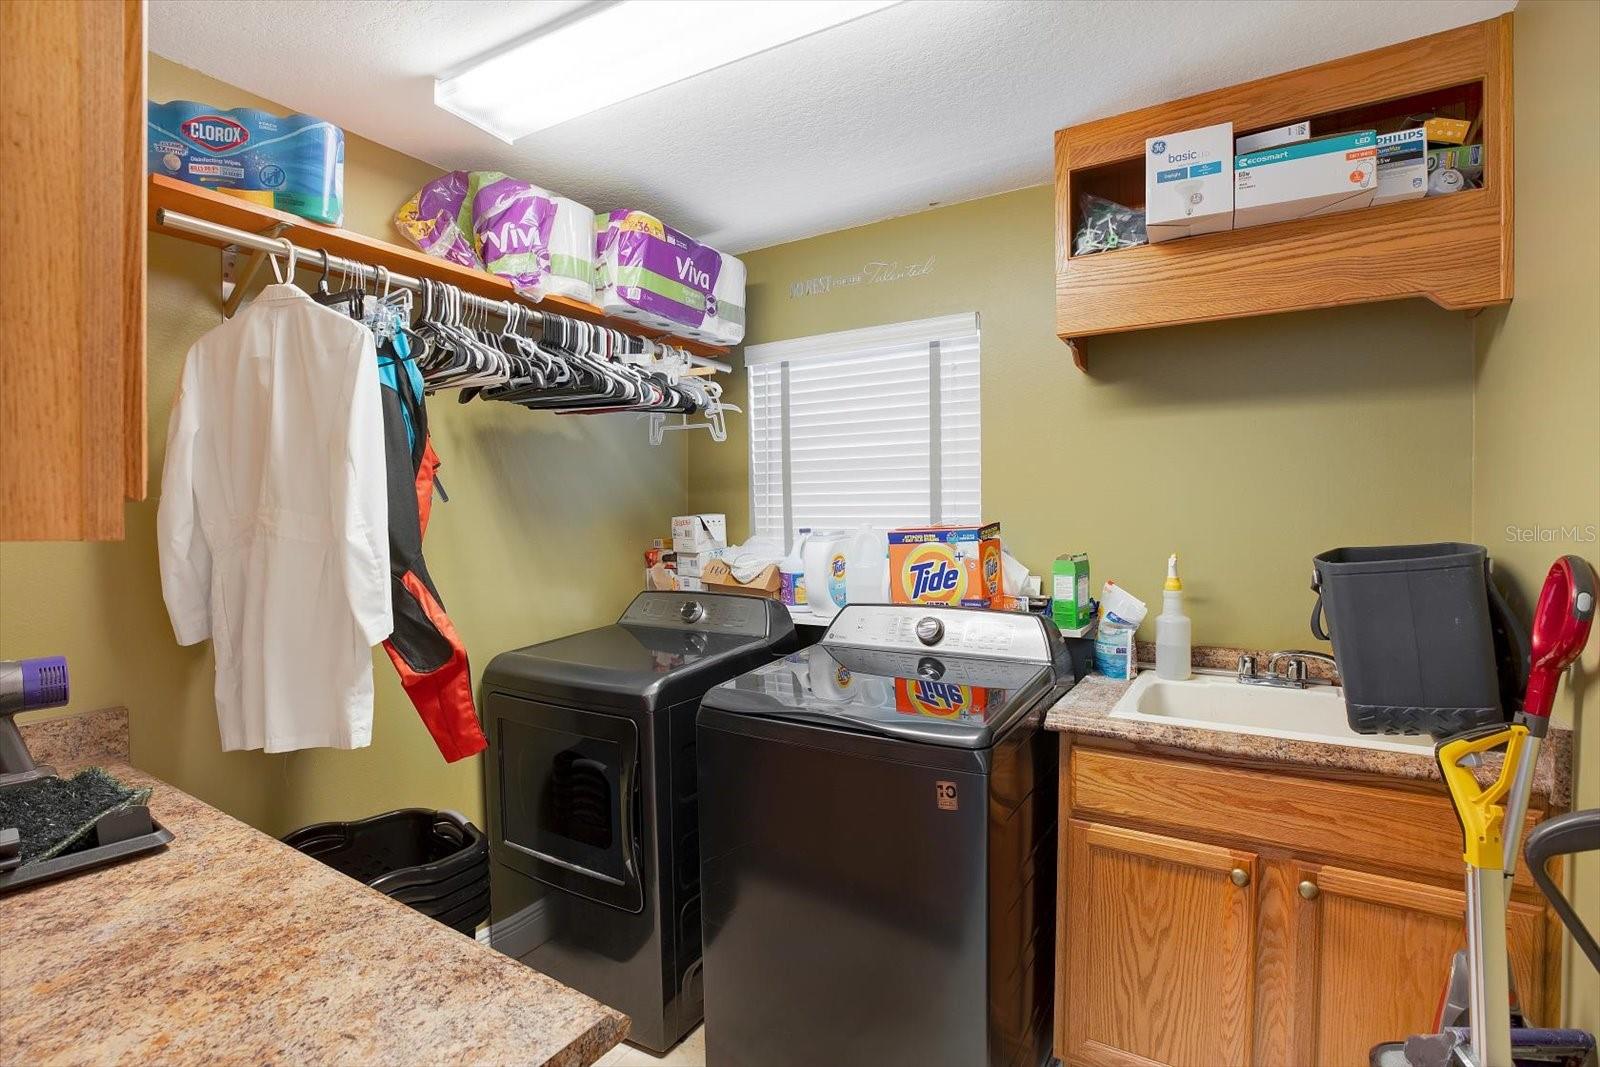 A large laundry room with plenty of storage and counter space for folding and hanging is conveniently located off the kitchen